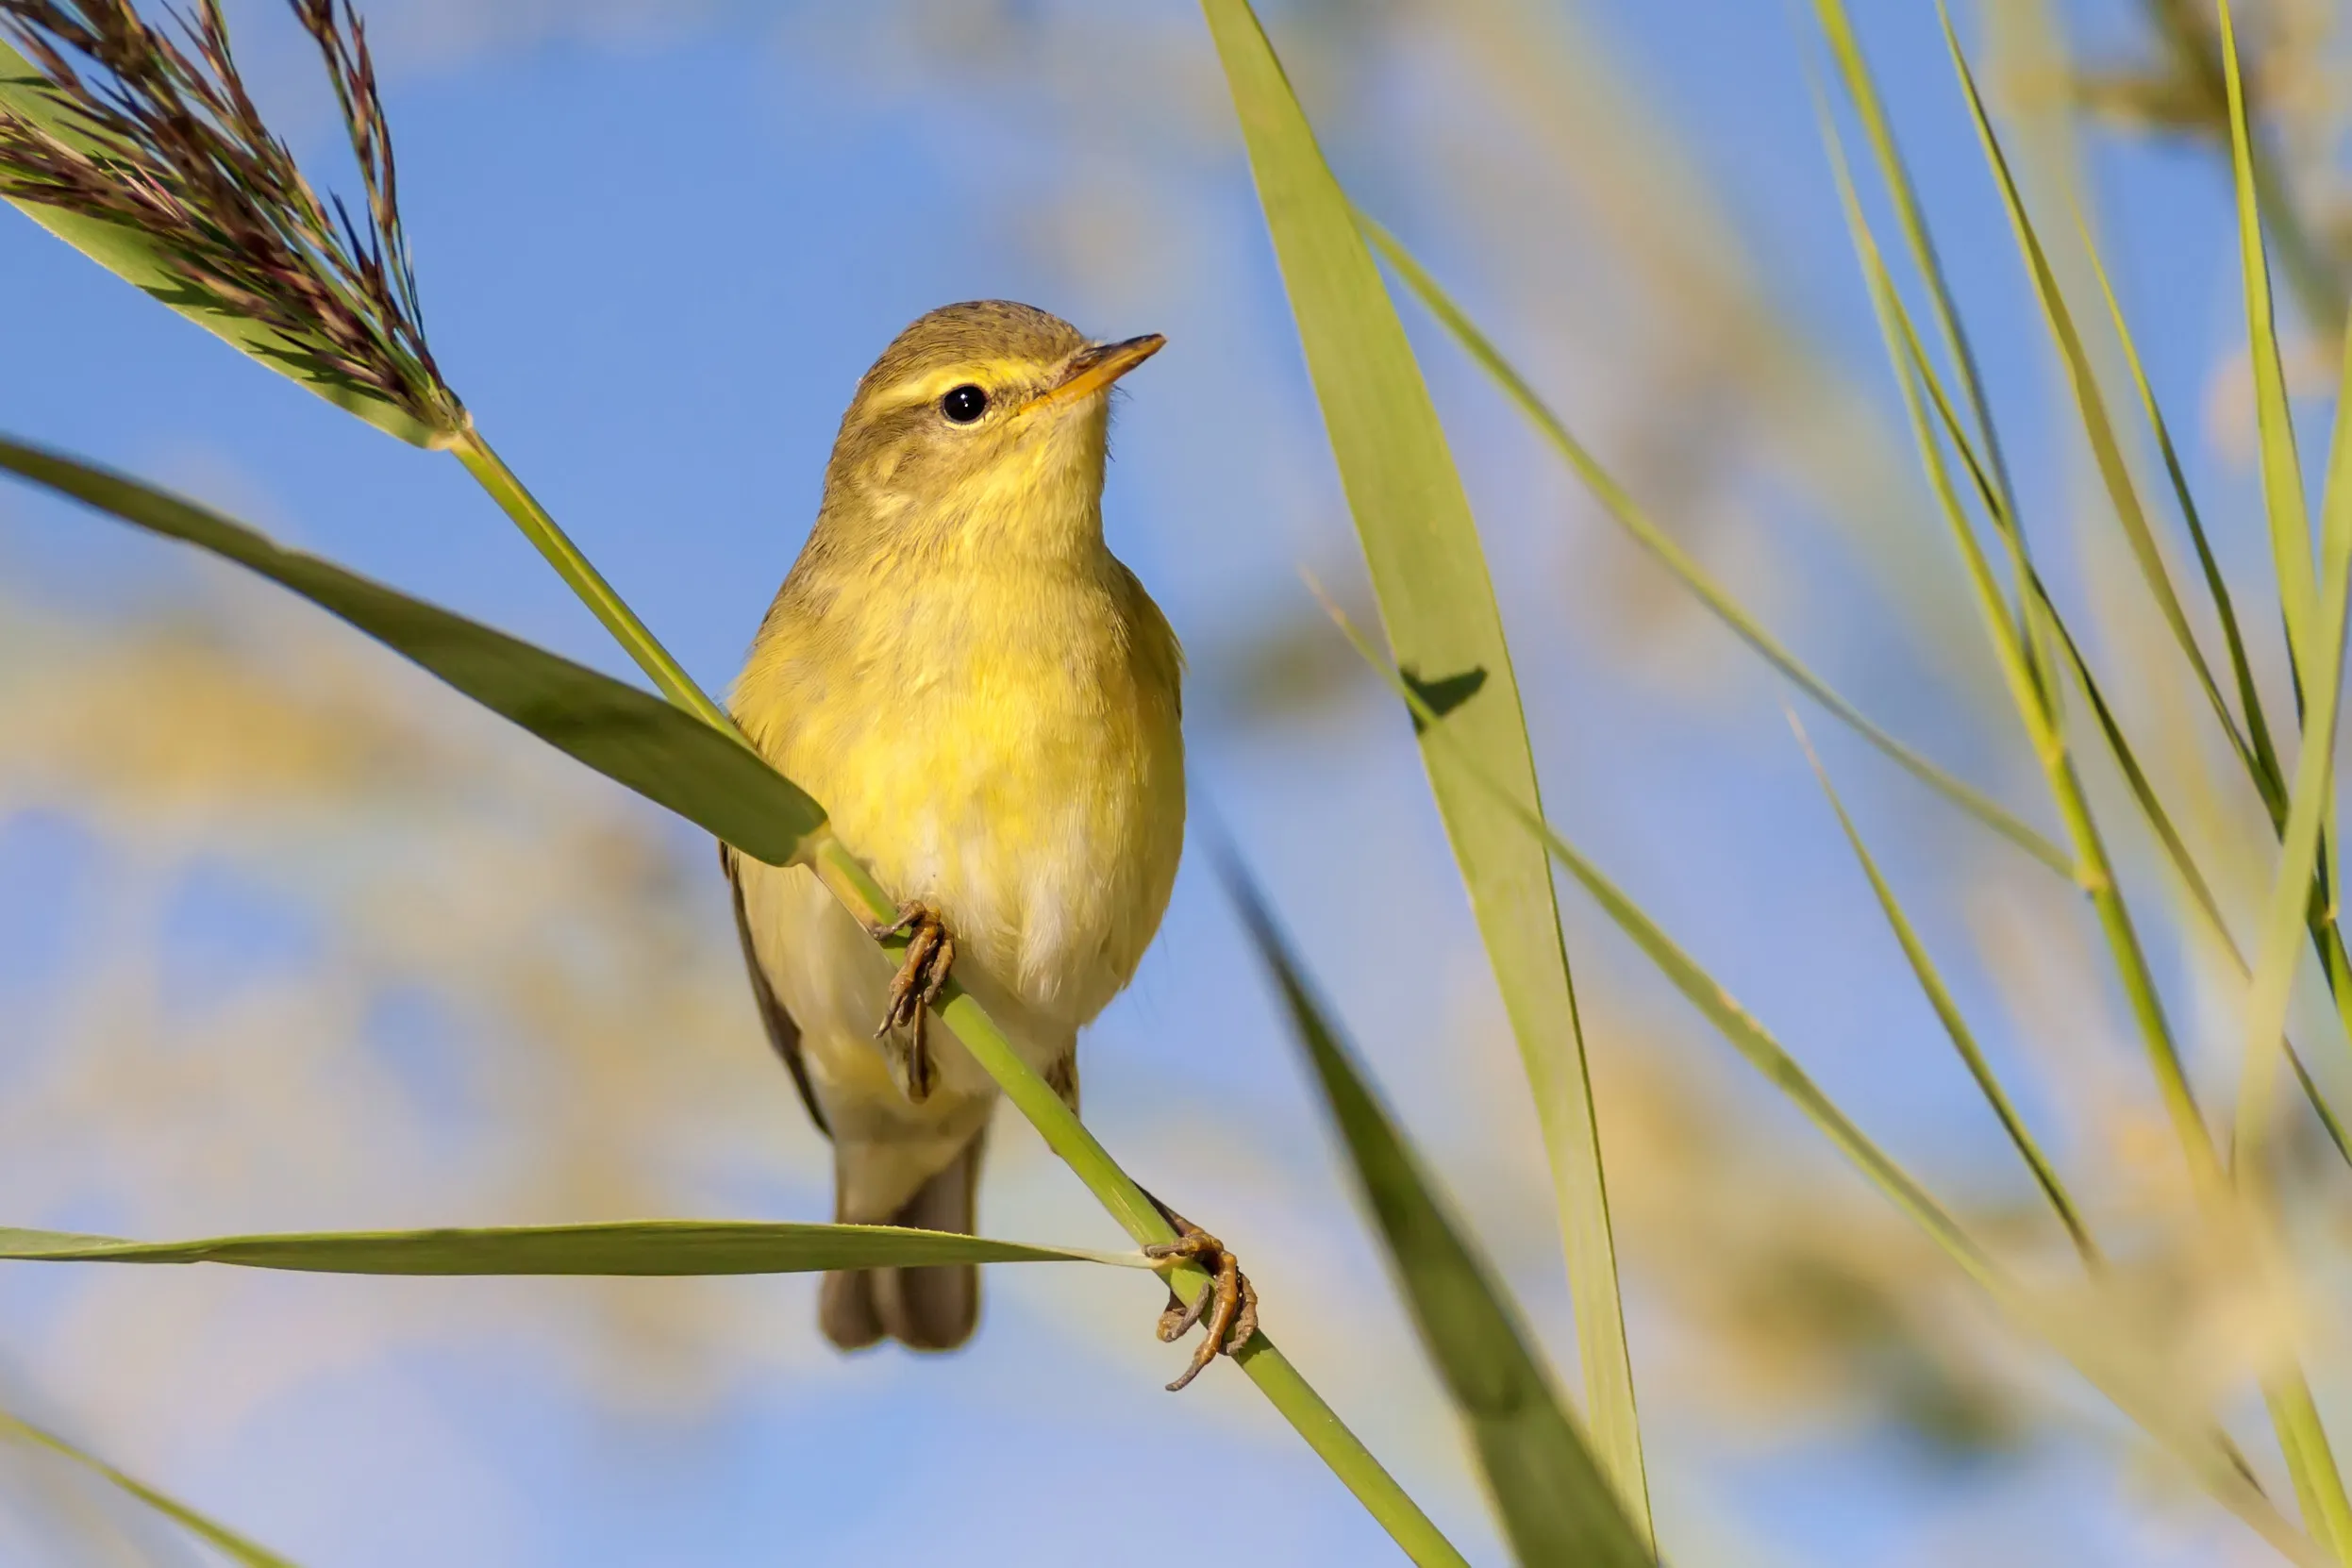 Lone Willow Warbler perched on a singular reed